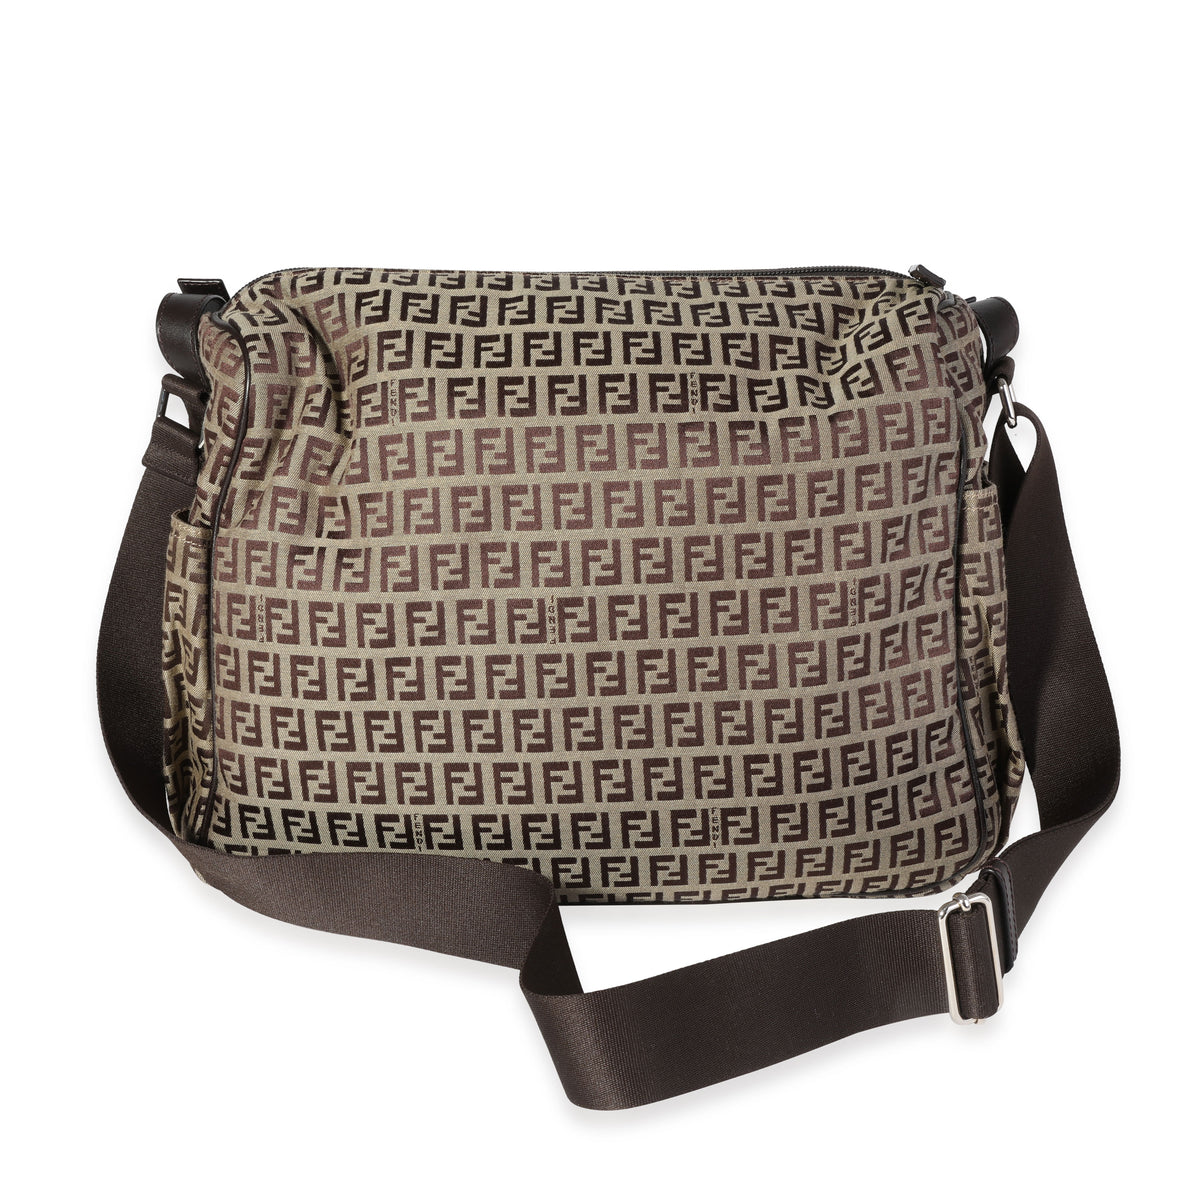 Fendi Brown Zucchino Canvas Baby Bag with Changing Pad